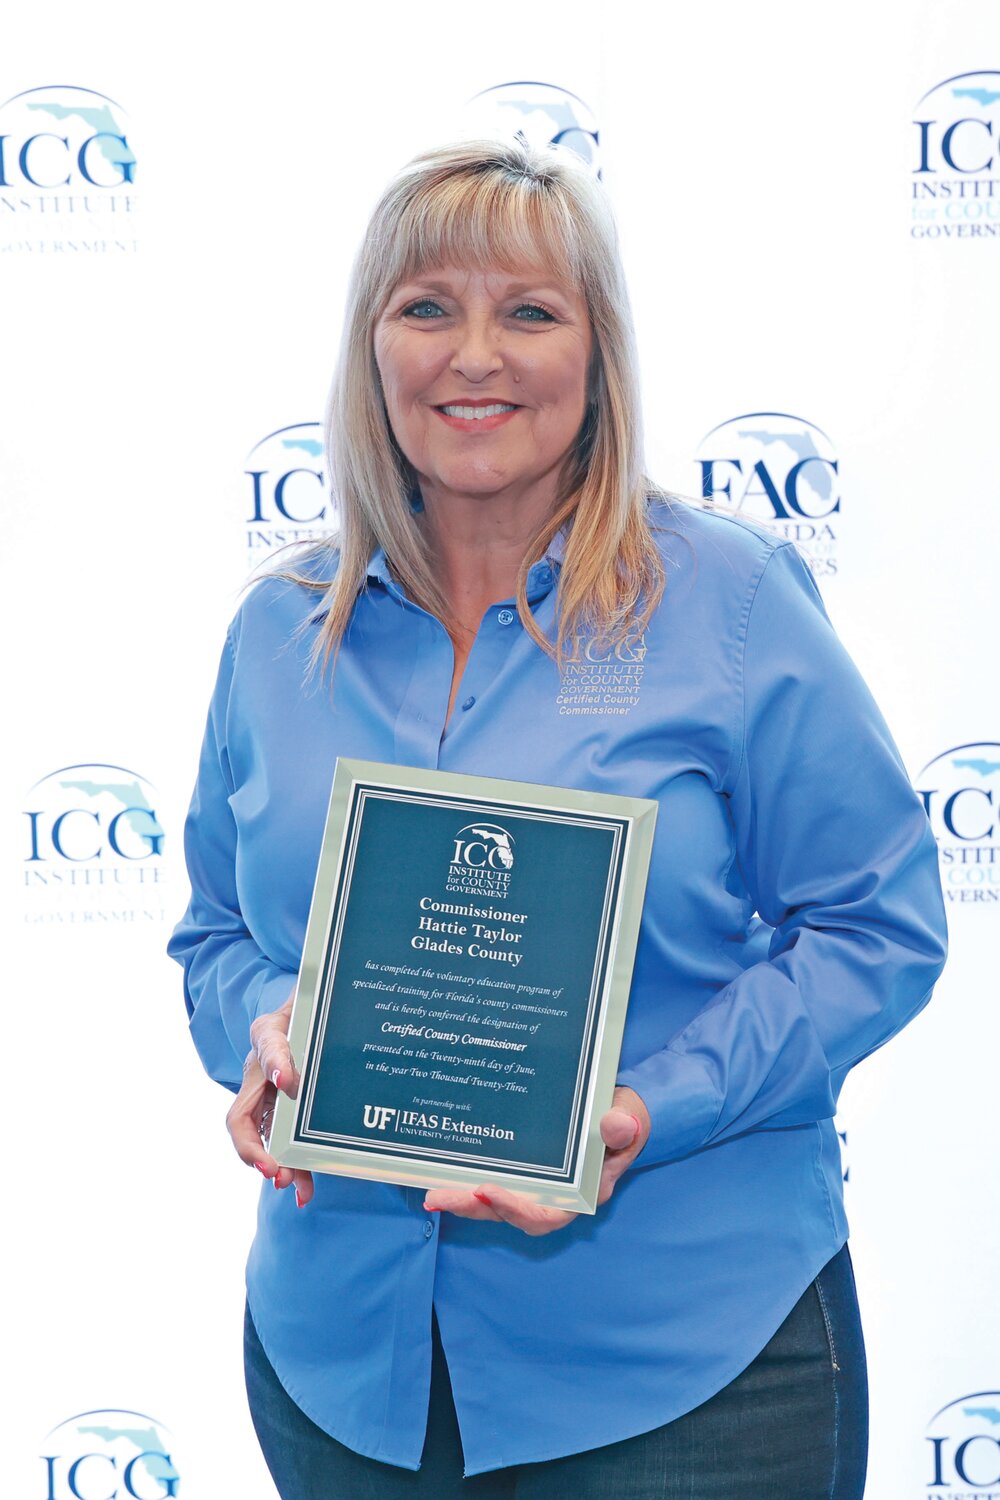 Glades County Commissioner Hattie Taylor was presented with the CCC designation from the ICG at an award ceremony held at the FAC Annual Conference and Educational Exposition in Orange County, Florida.